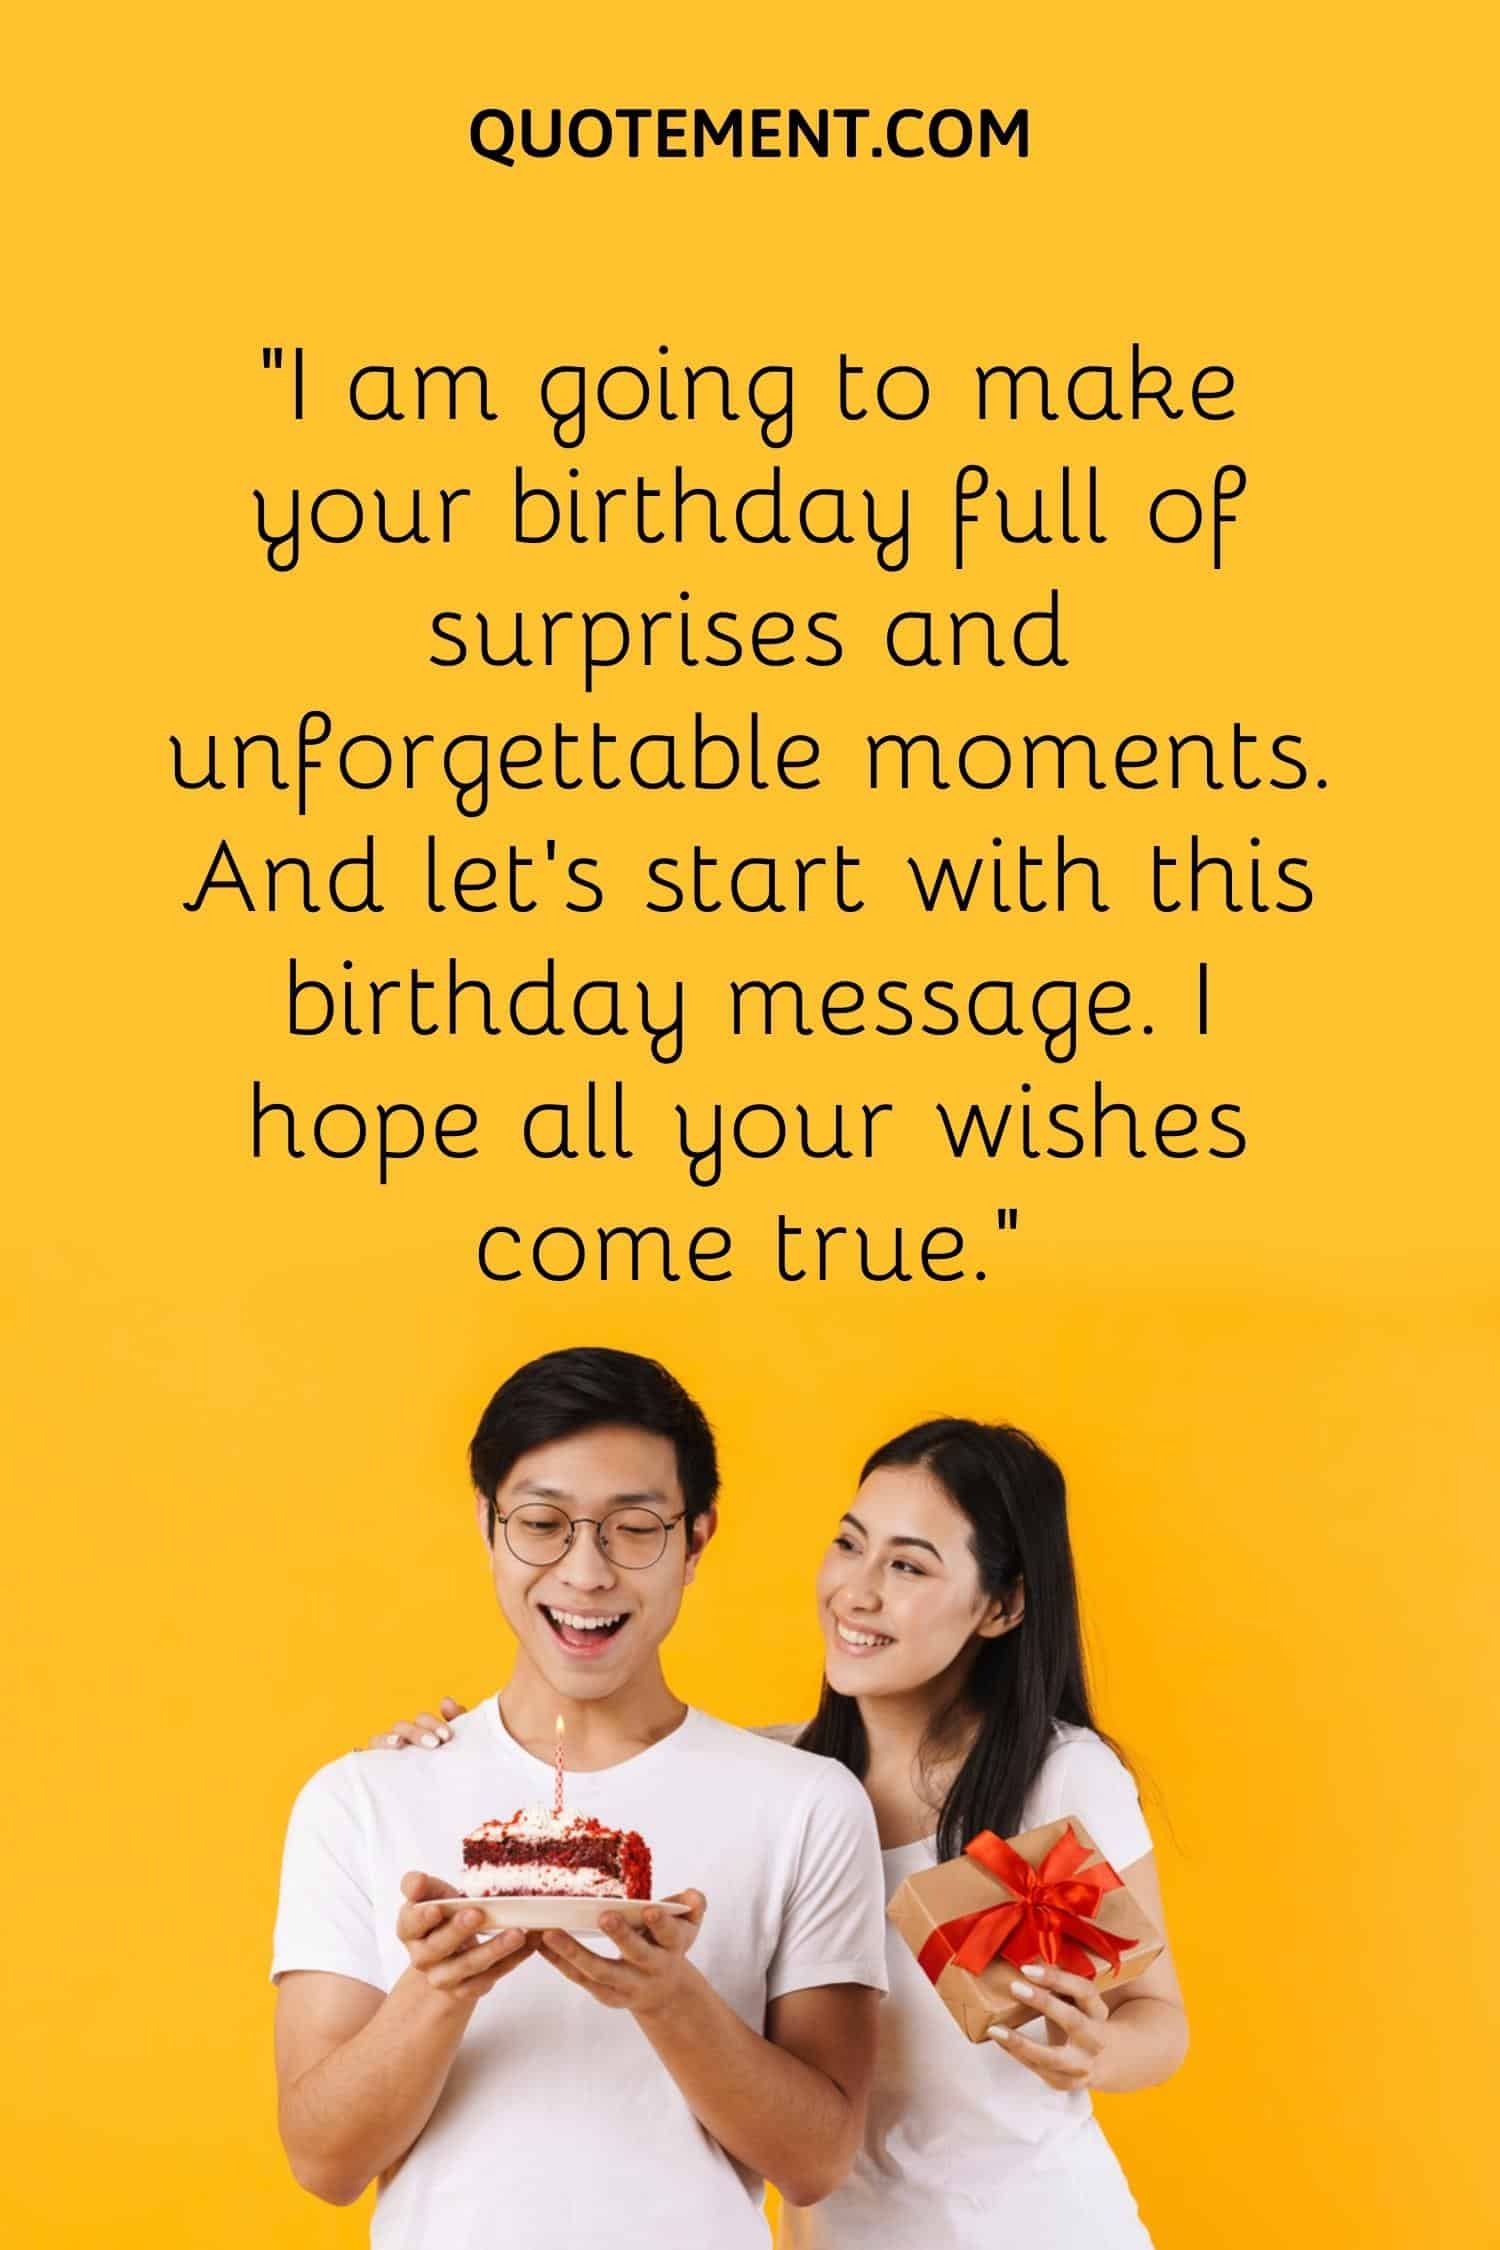 I am going to make your birthday full of surprises and unforgettable moments